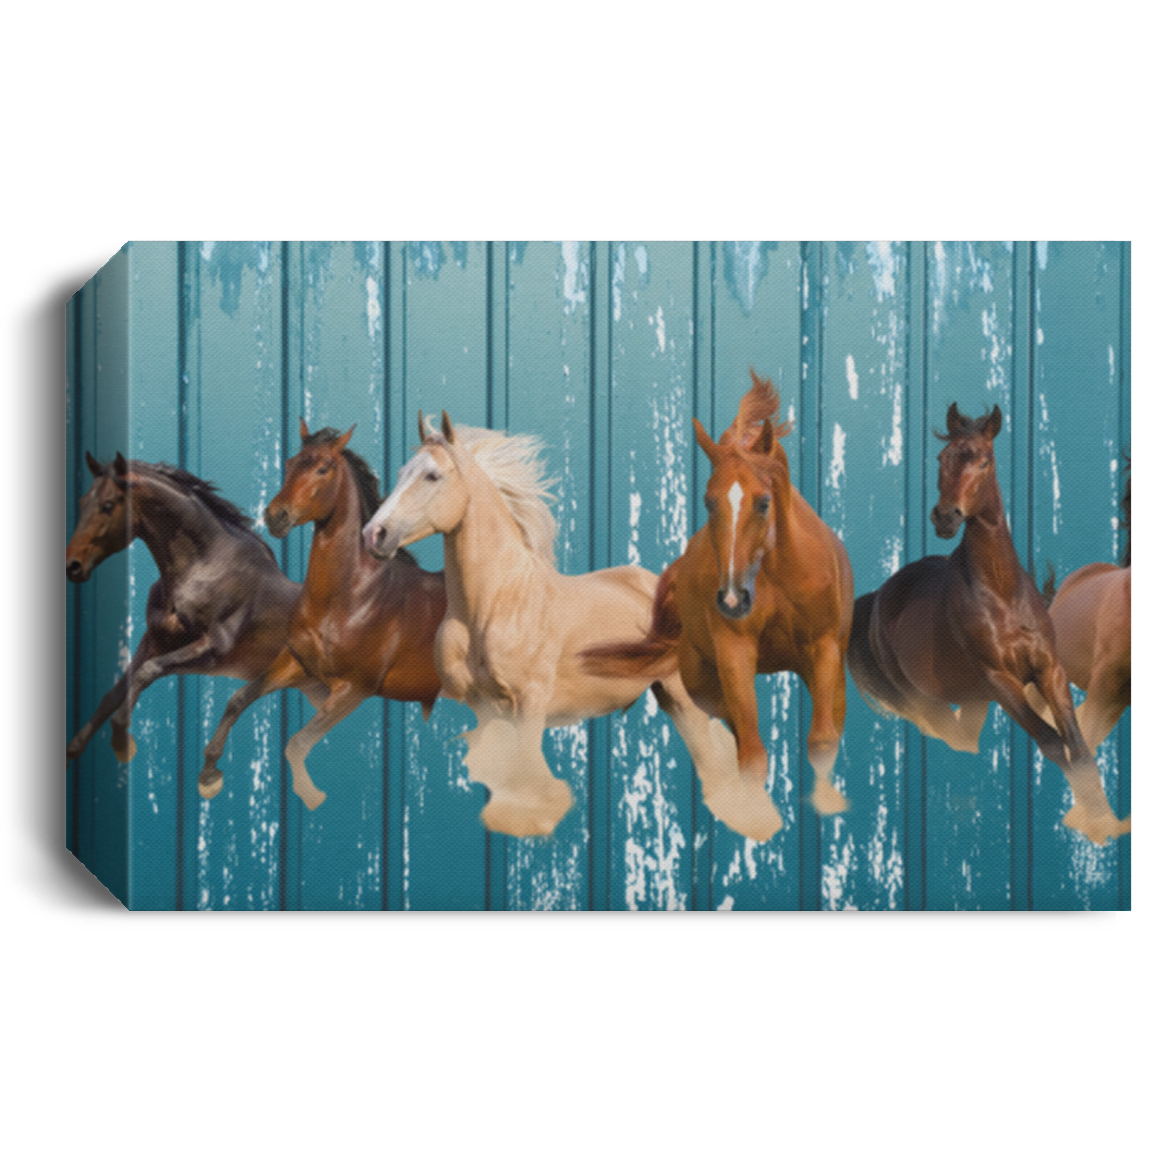 Deluxe Canvas of Running Horses w Teal Paneling - MyAllOutHorses